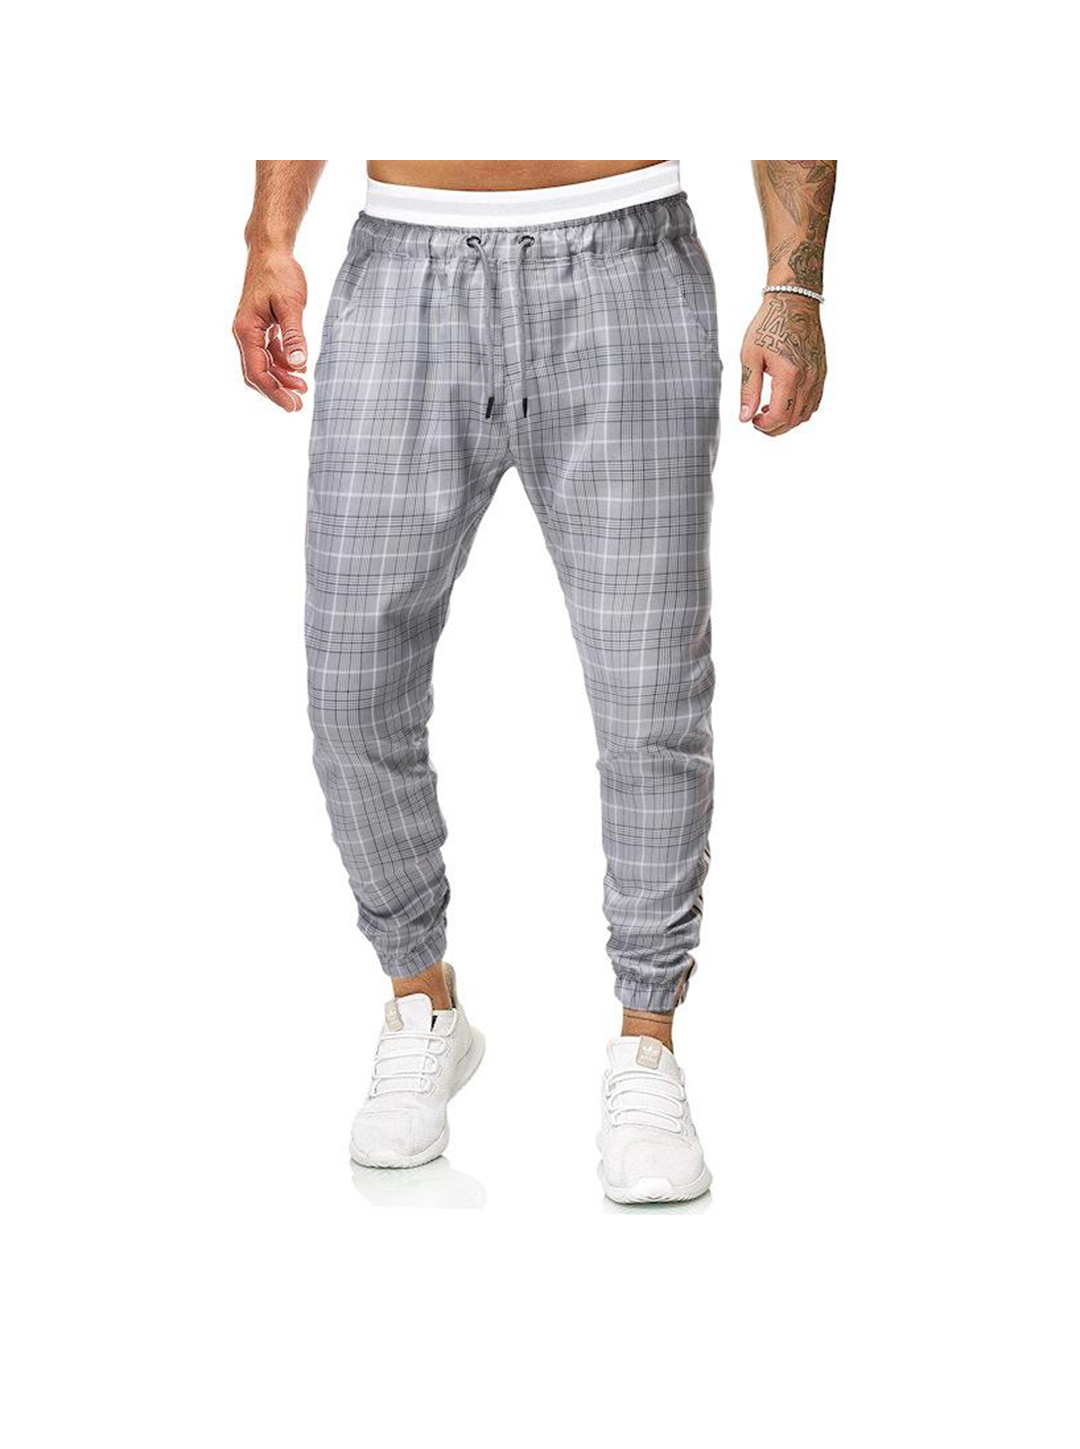 Men's Henry Printed Houndstooth Casual Jogger-poisonstreetwear.com